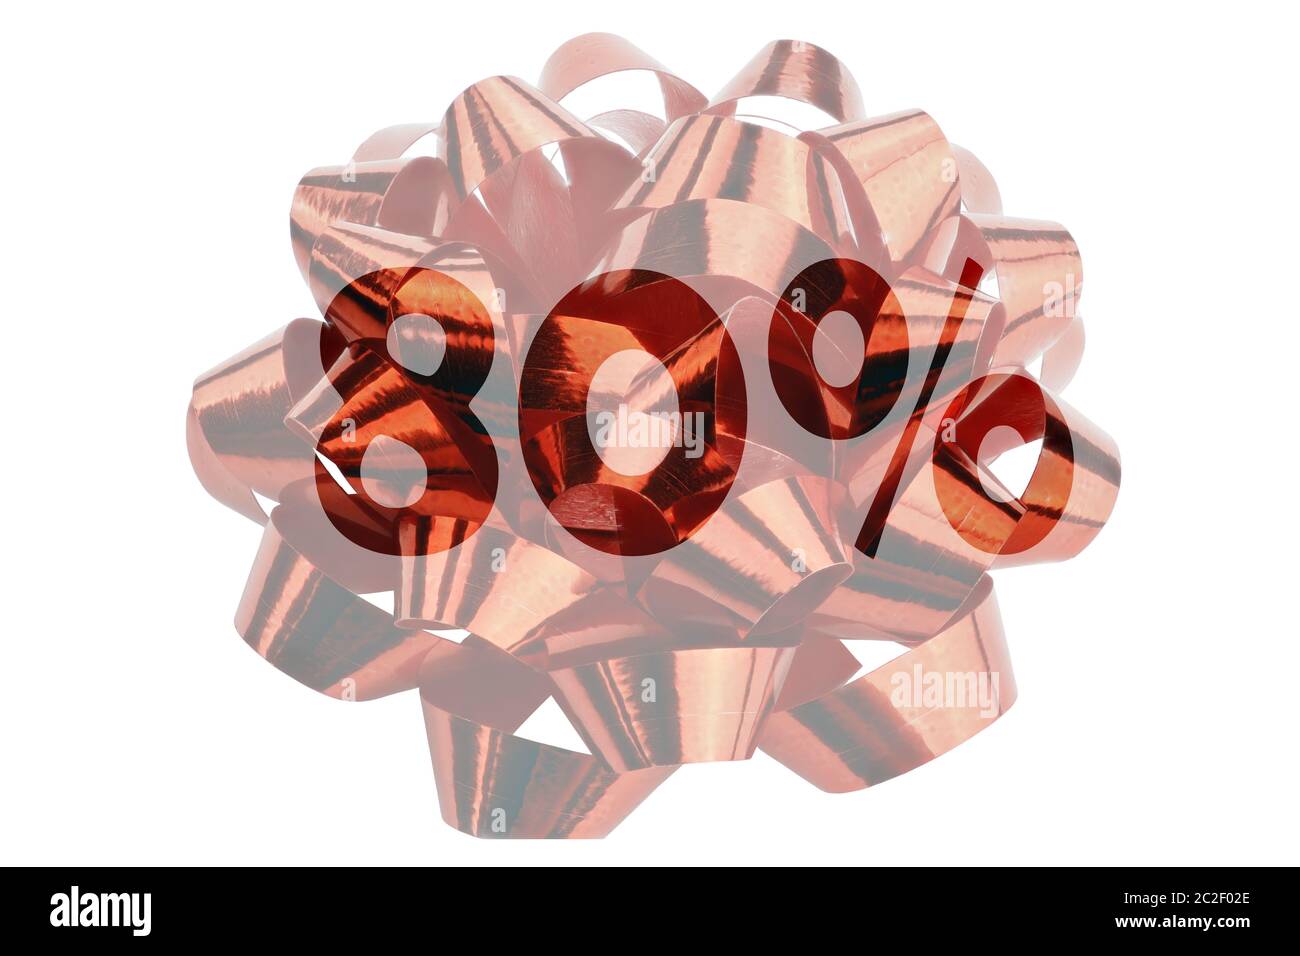 Symbolically represented 80 percent with picture of a gift loop Stock Photo